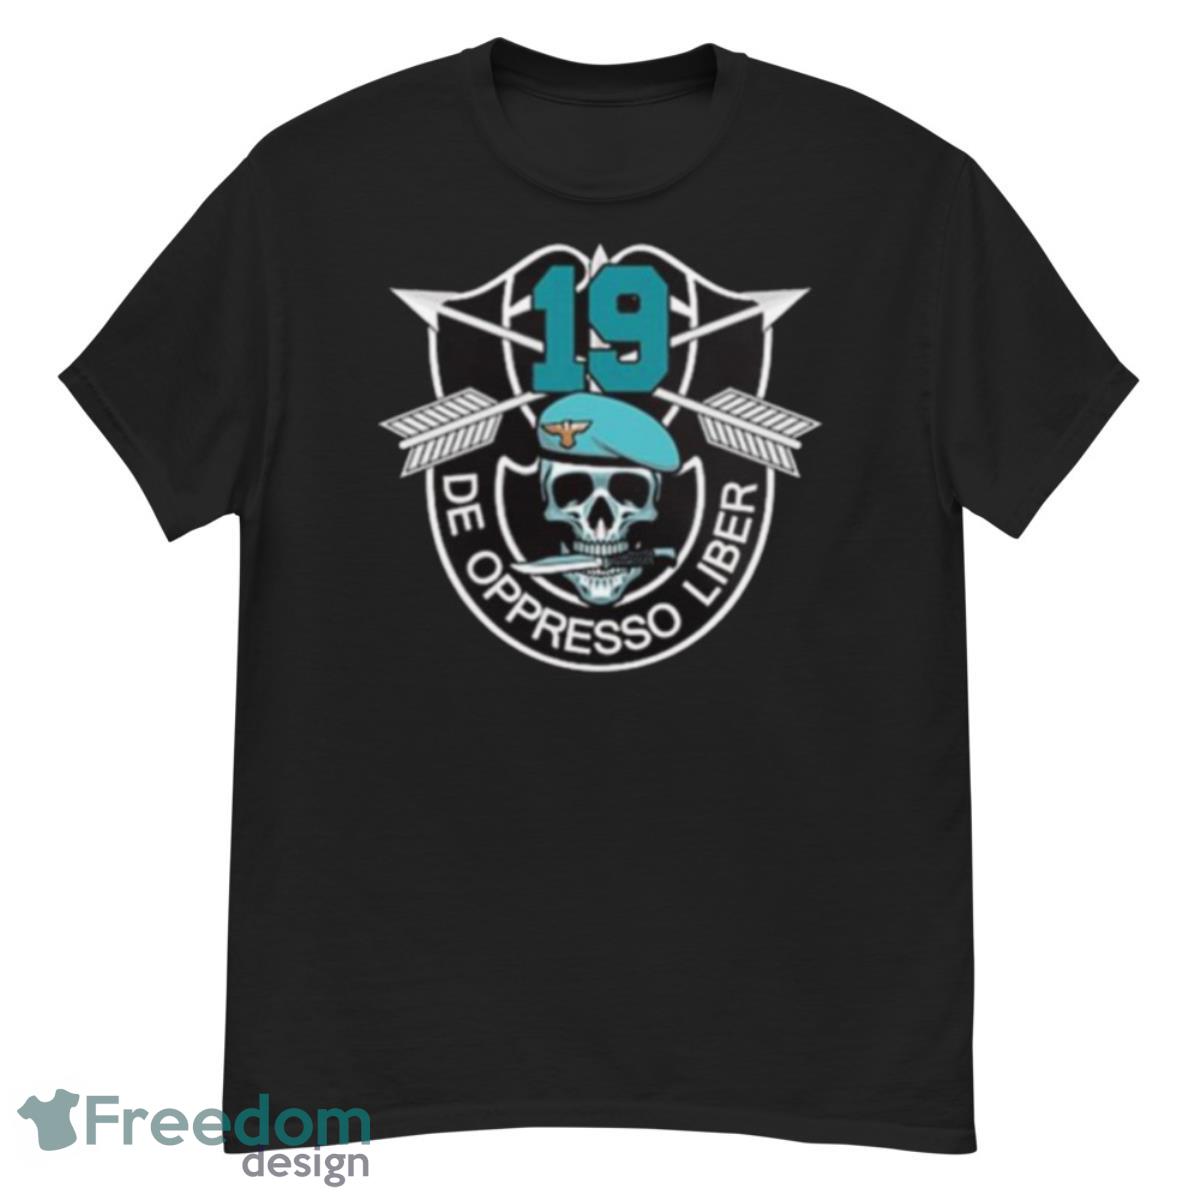 19Th Special Forces Group 19Th Sfg De Oppresso Liber Shirt - G500 Men’s Classic T-Shirt